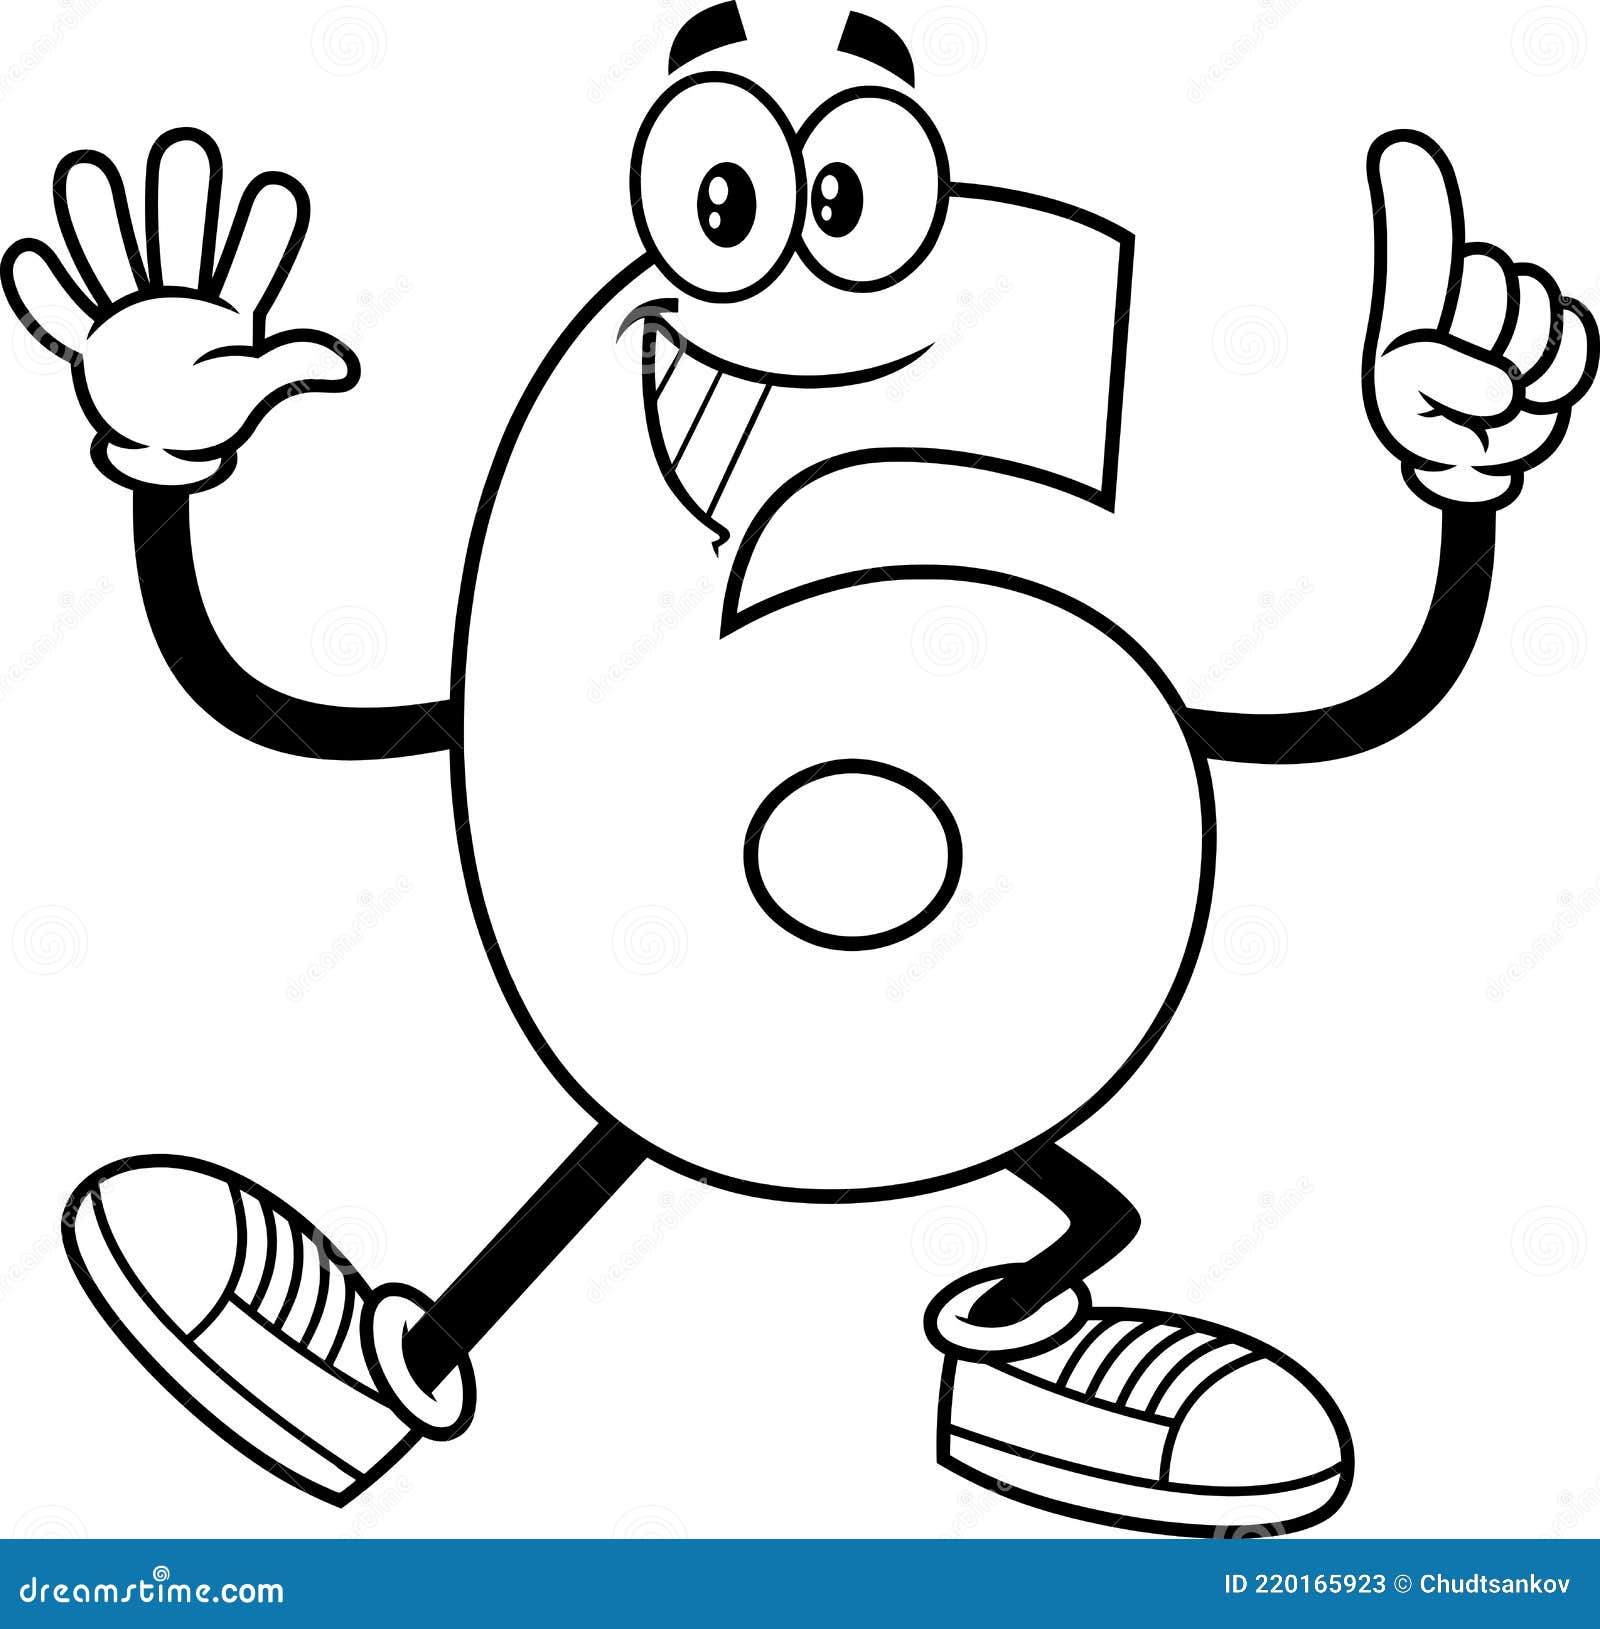 Outlined Funny Number Six 6 Cartoon Character Showing Hands Number Six  Stock Vector - Illustration of comic, drawing: 220165923